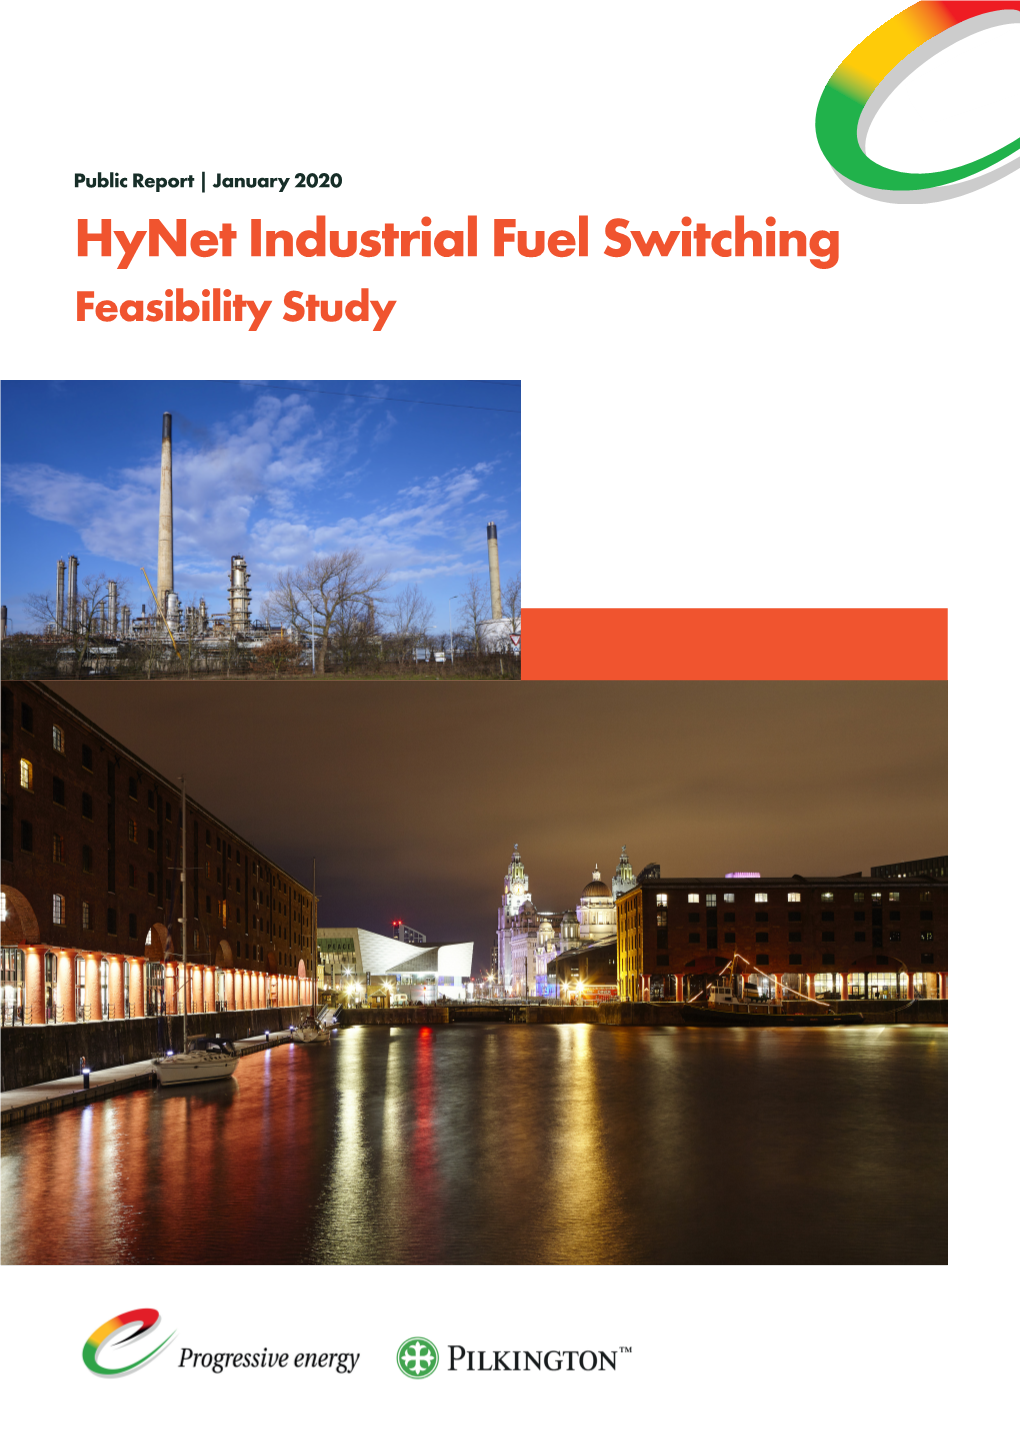 Hynet Industrial Fuel Switching Feasibility Study 2 Hynet Industrial Fuel Switching Hynet Industrial Fuel Switching 3